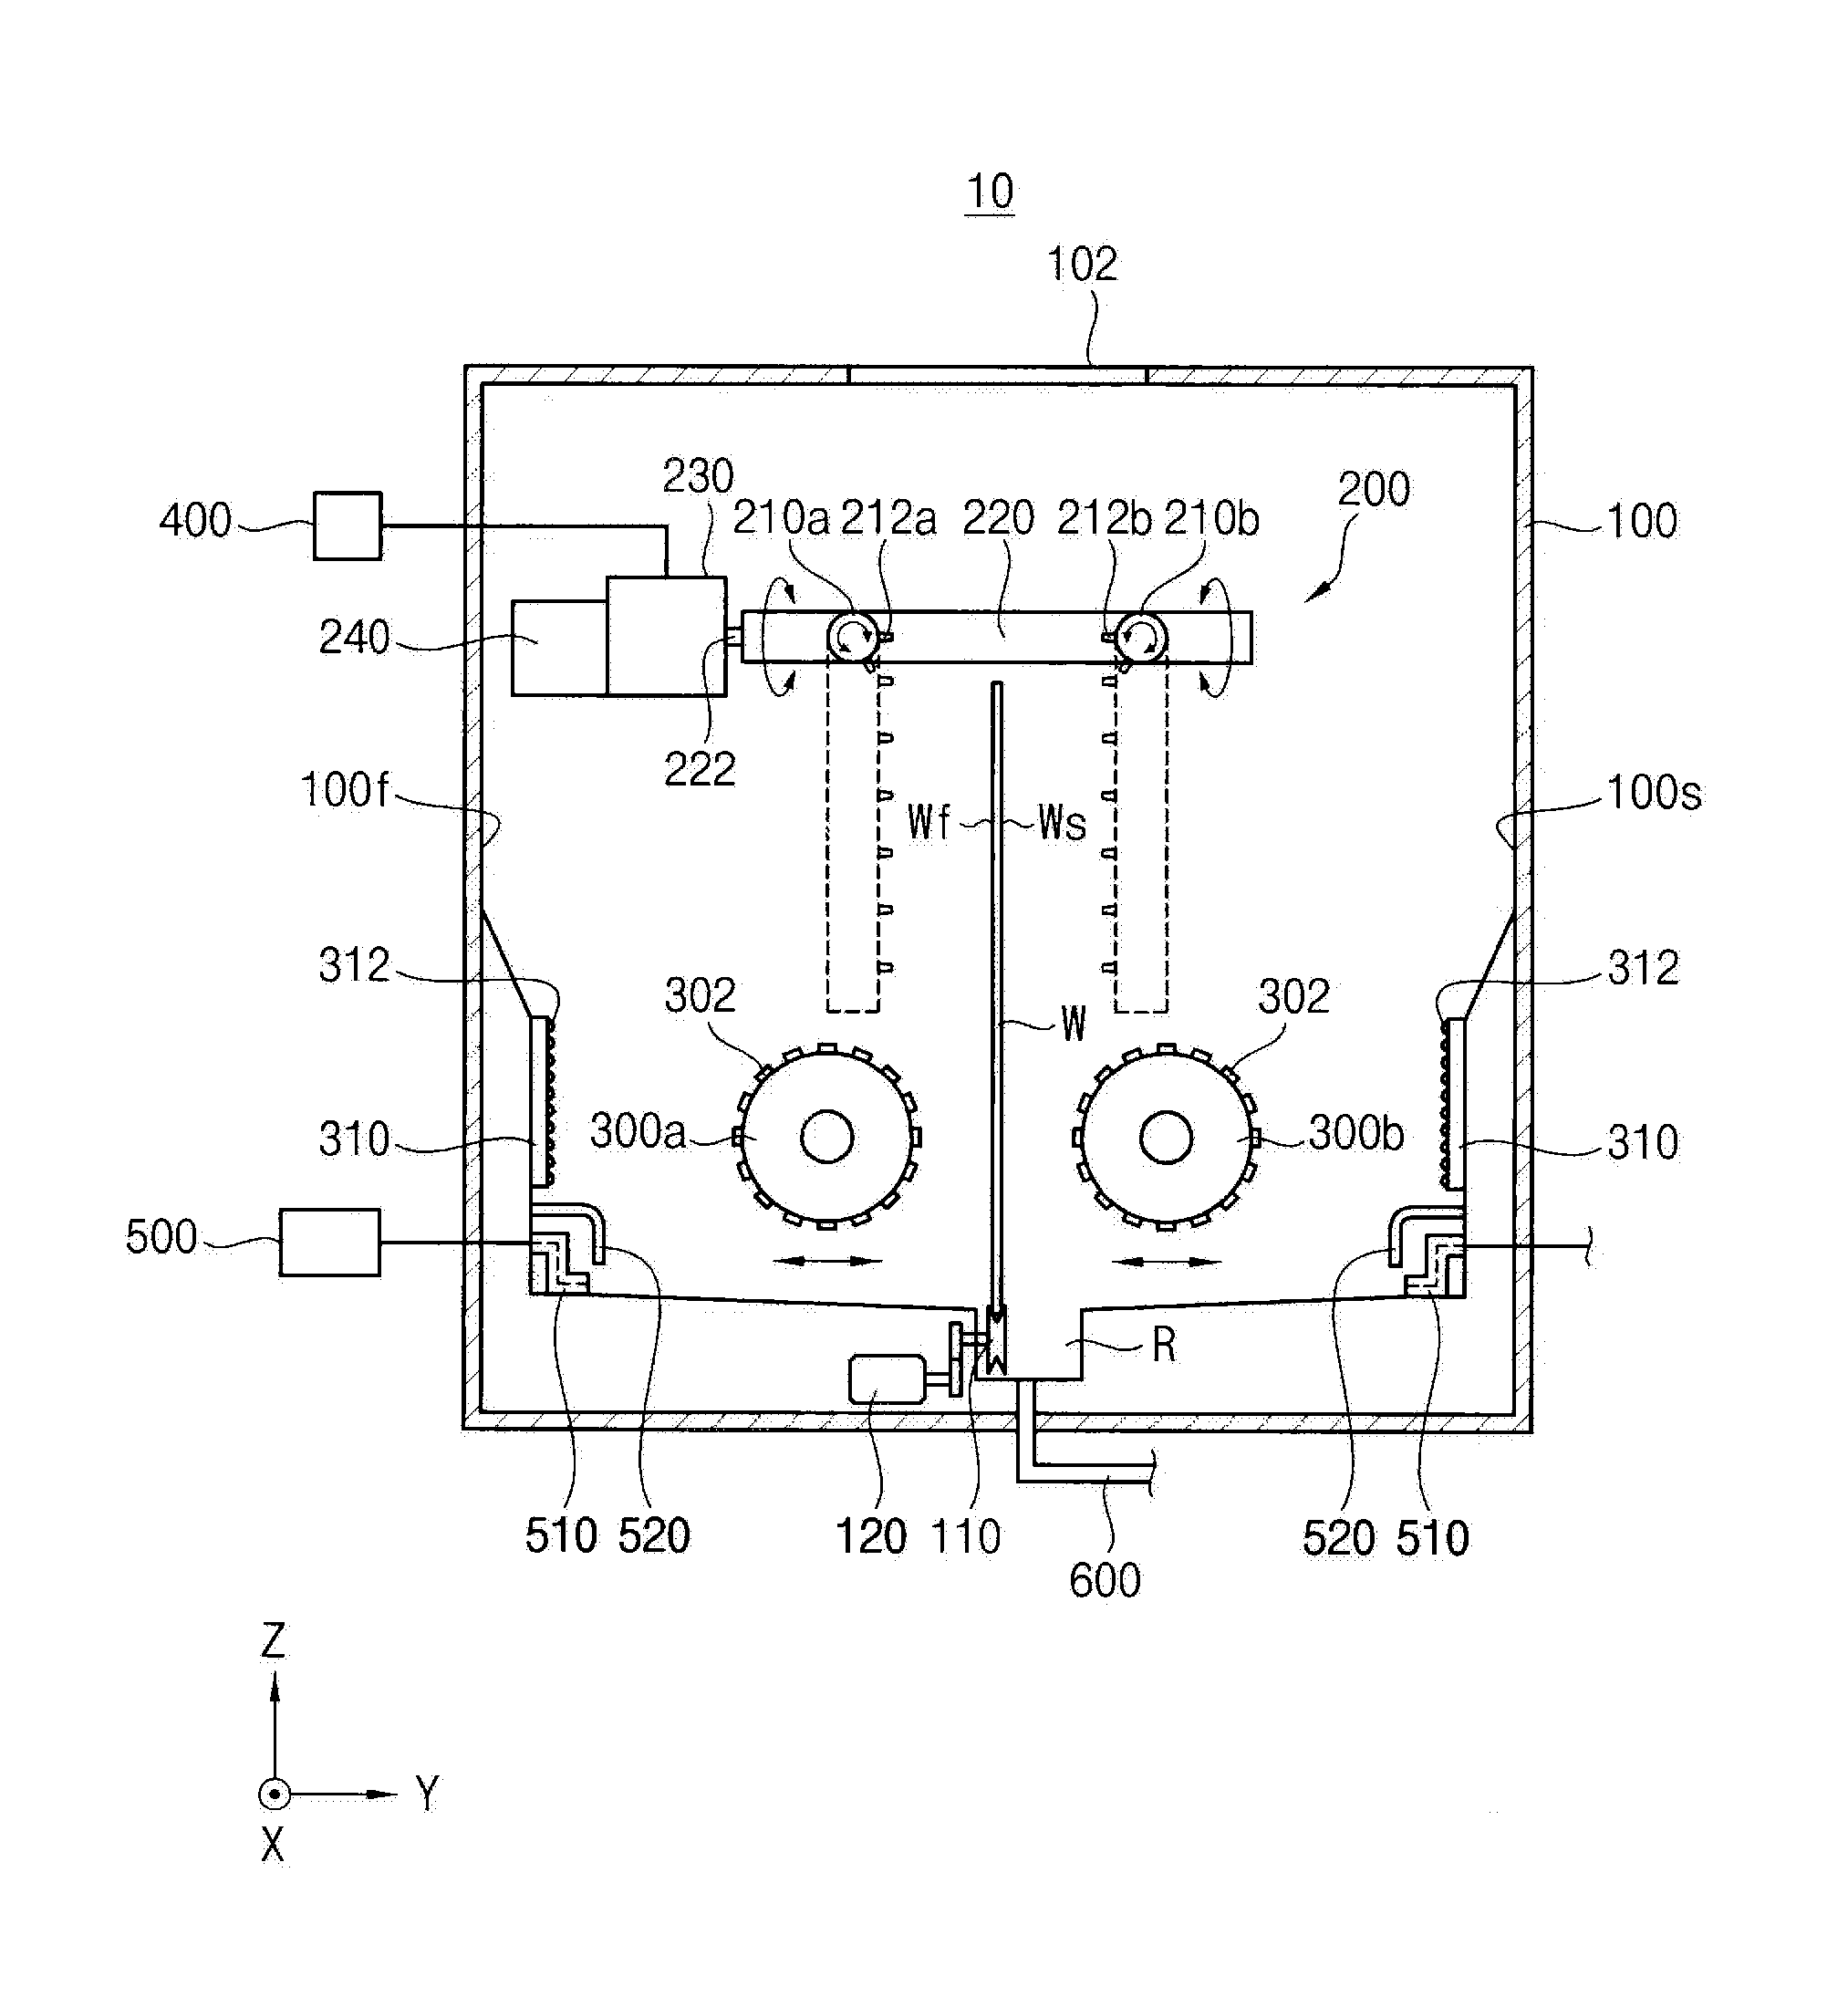 Substrate cleaning apparatus